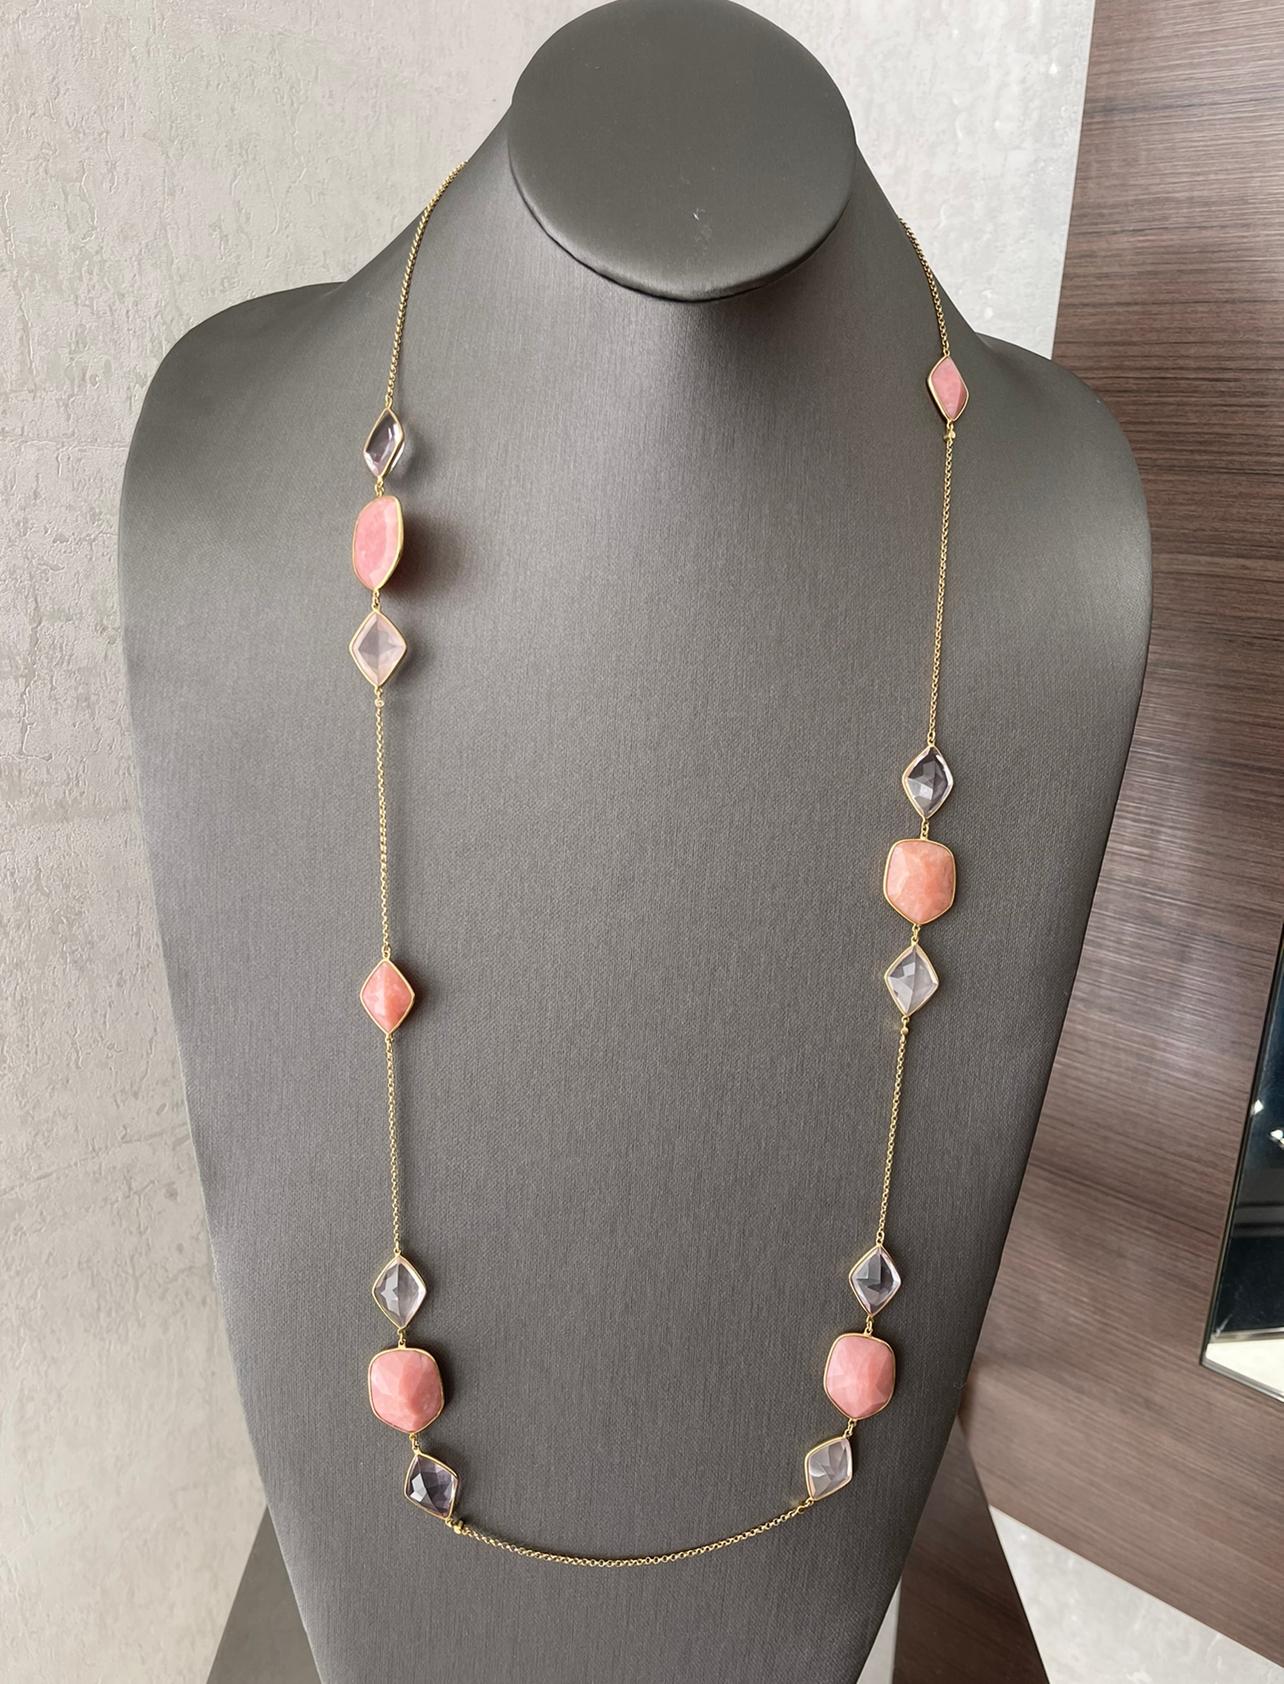 Rose Quartz Necklace in 18K Yellow Gold. The necklace features stations of rose quartz that are bezel set. 
39